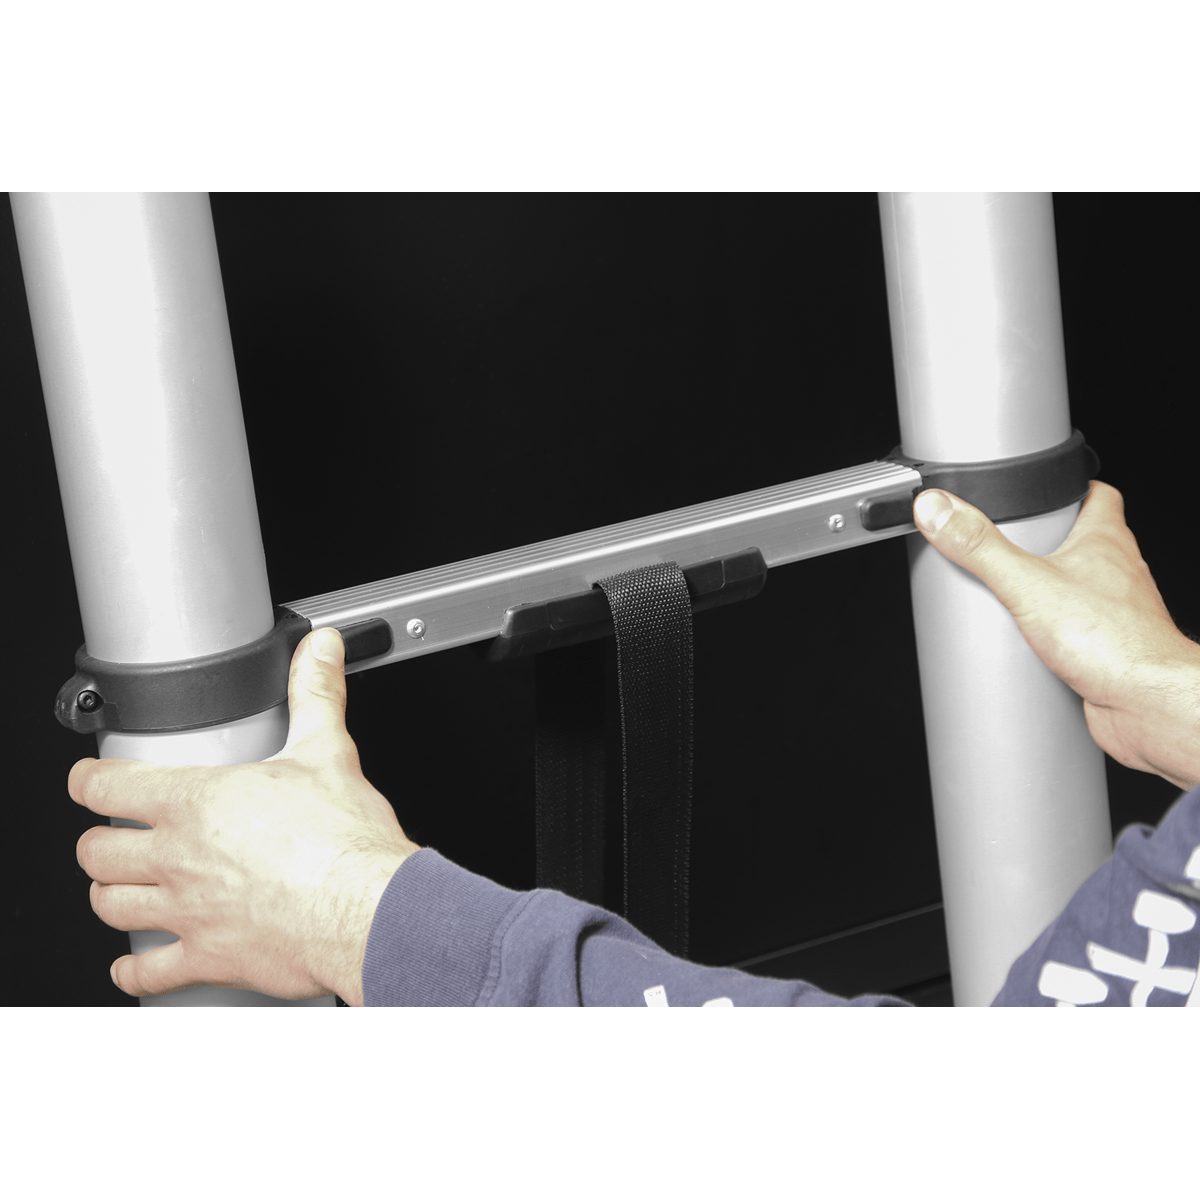 Aluminium Telescopic Ladder 13-Tread EN 131 | Extends and locks rung-by-rung allowing use at multiple heights. | toolforce.ie